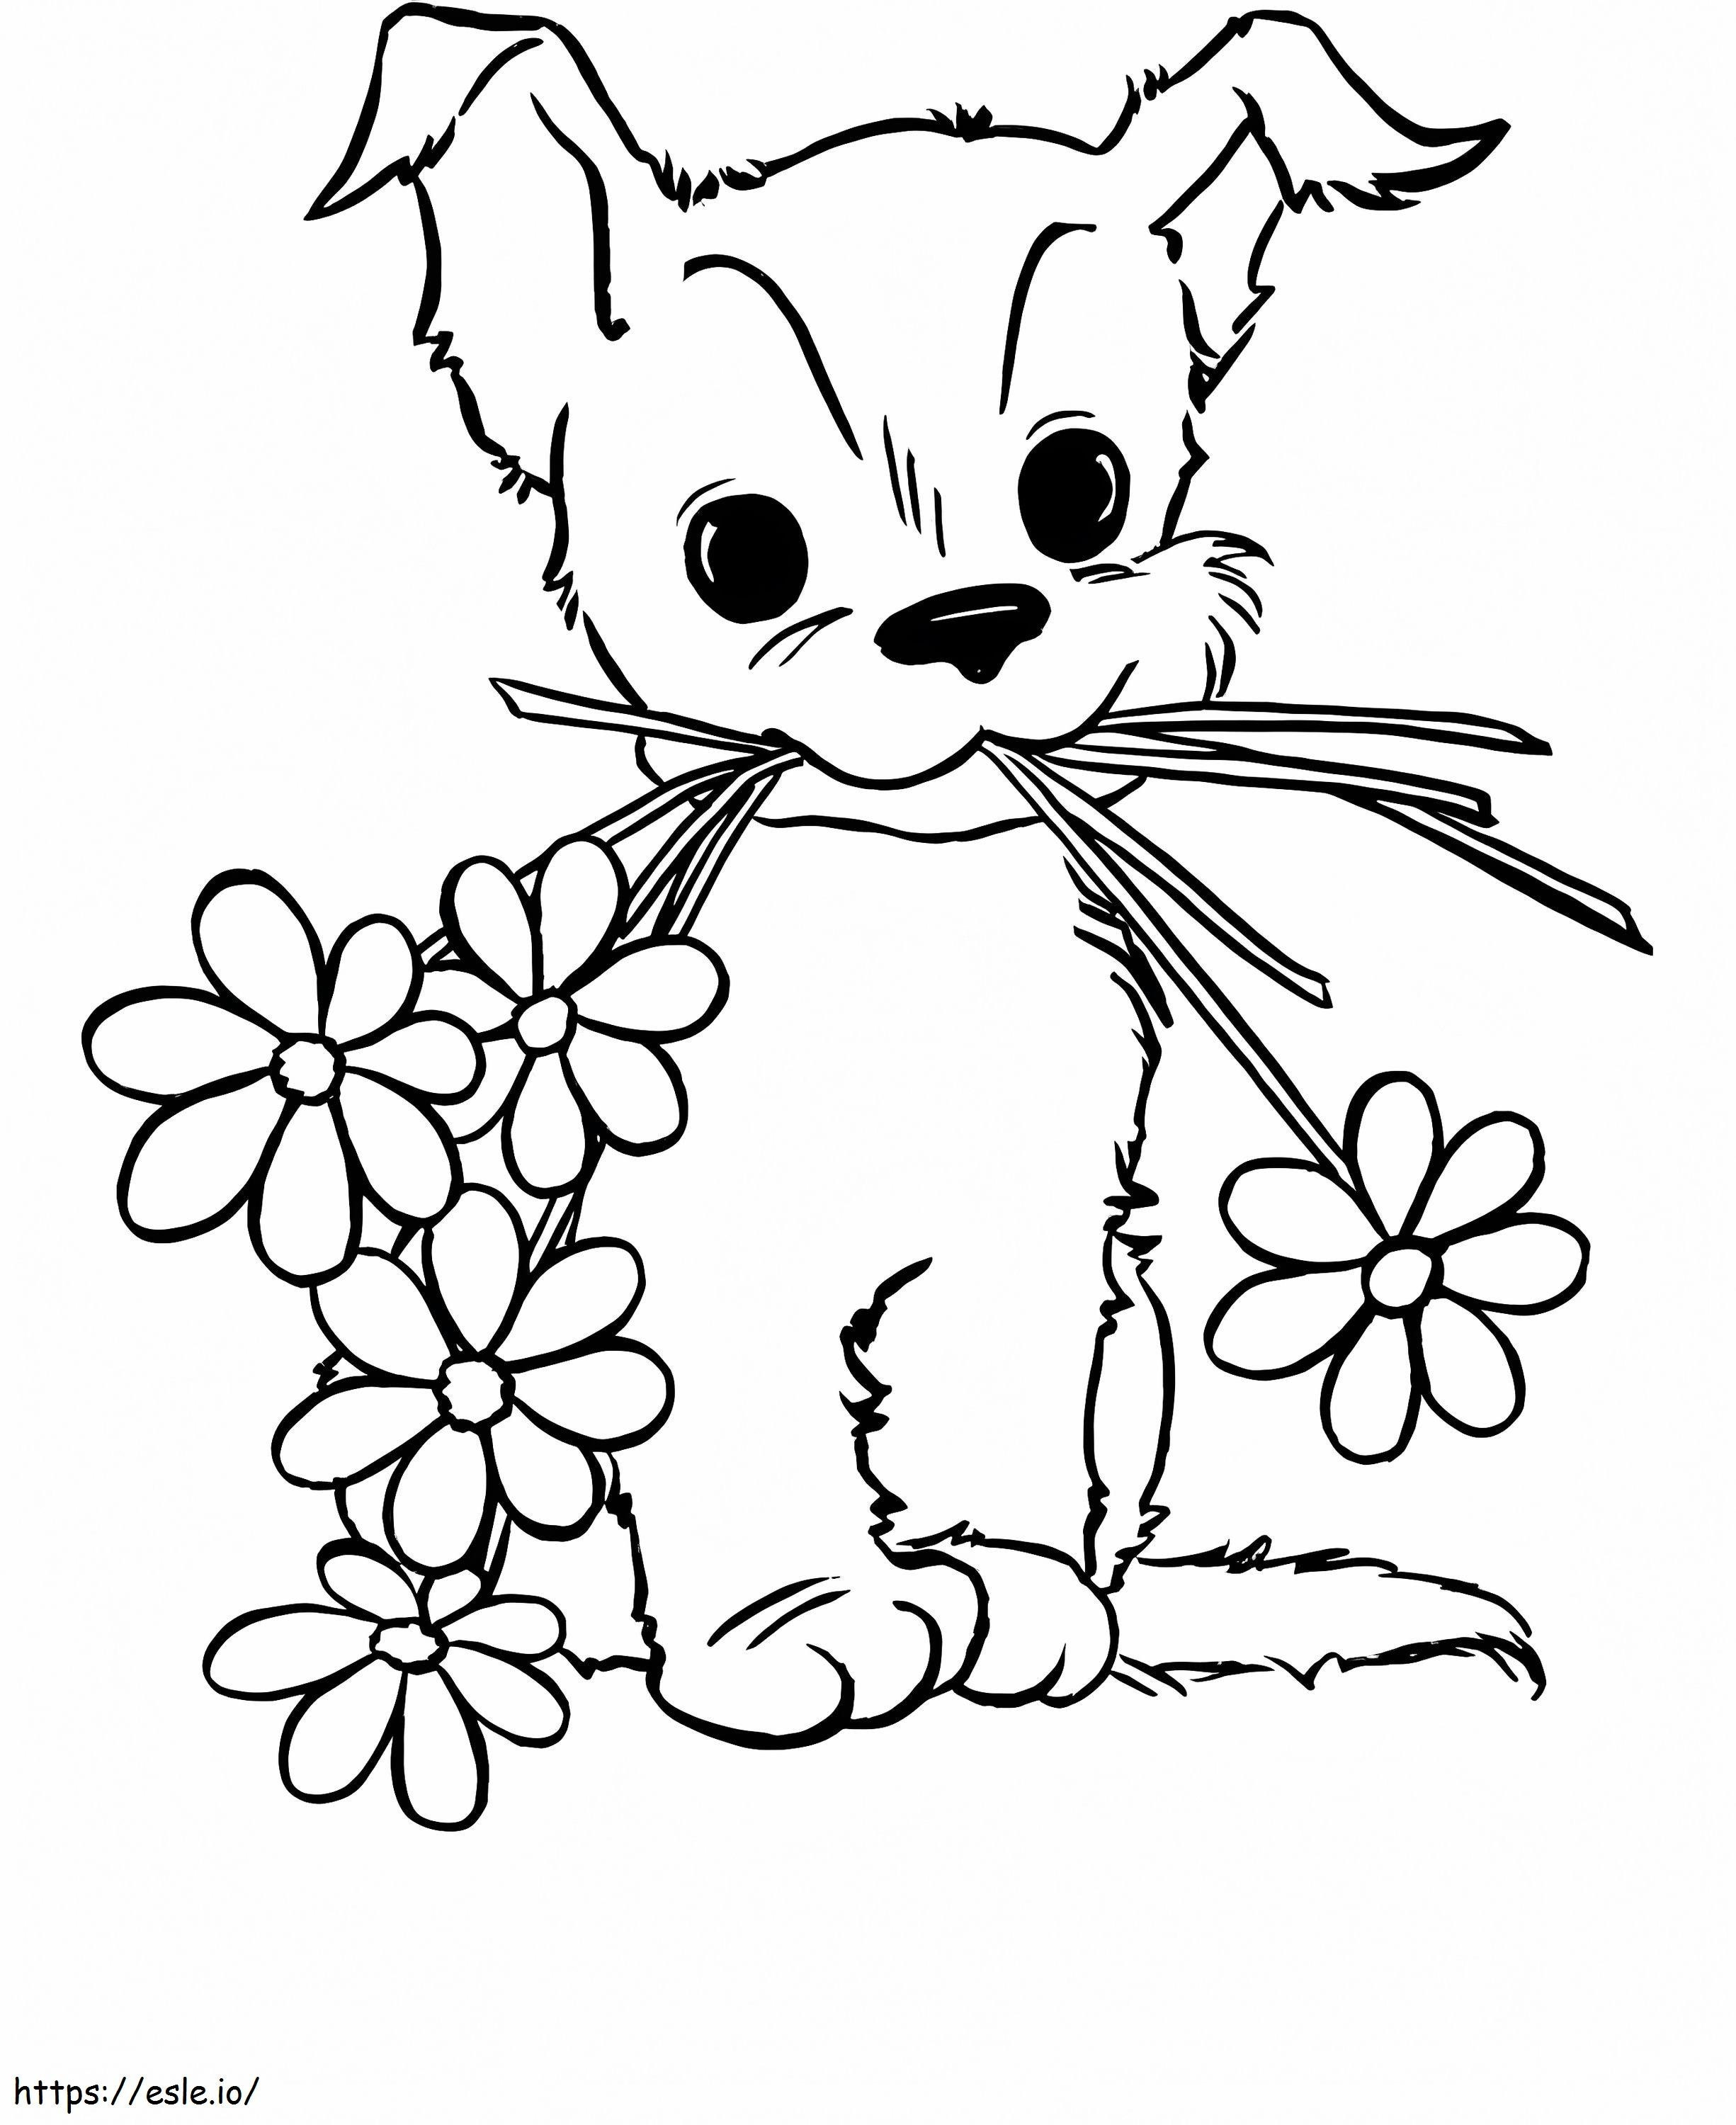 Dog With Flowers In Its Mouth coloring page